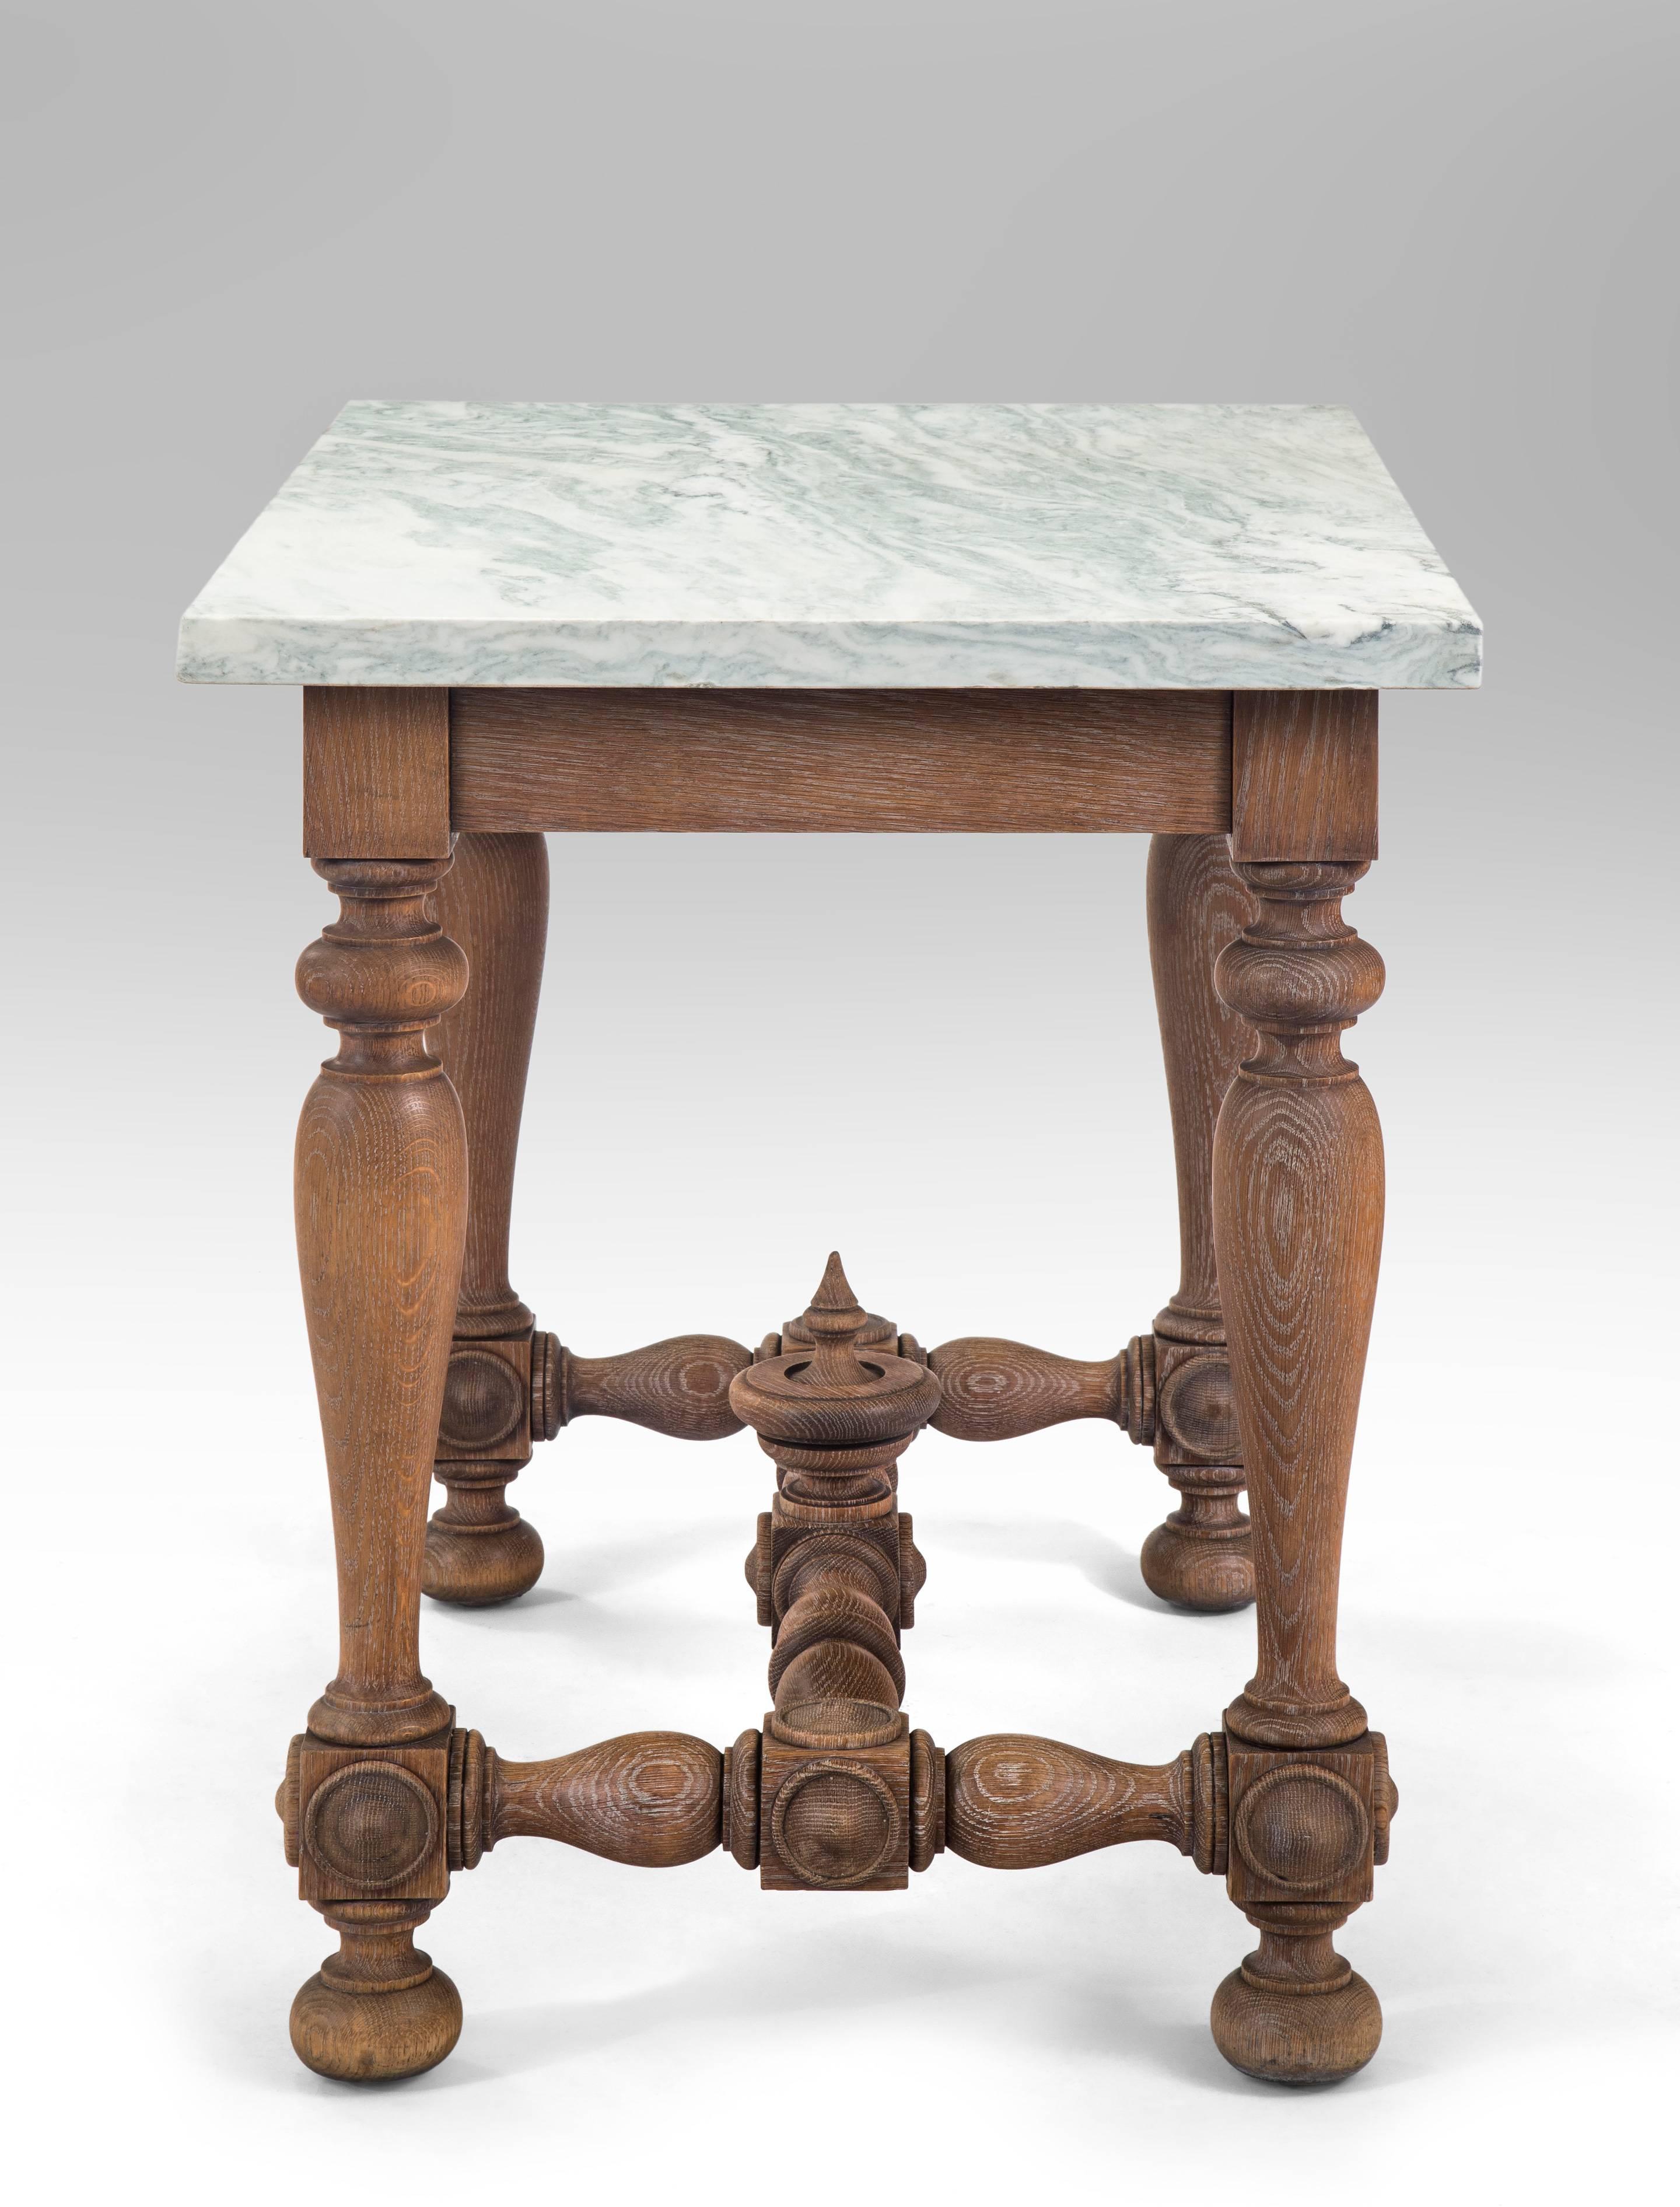 19th Century Swedish Baroque Revival Cerused Oak Table with Marble Top